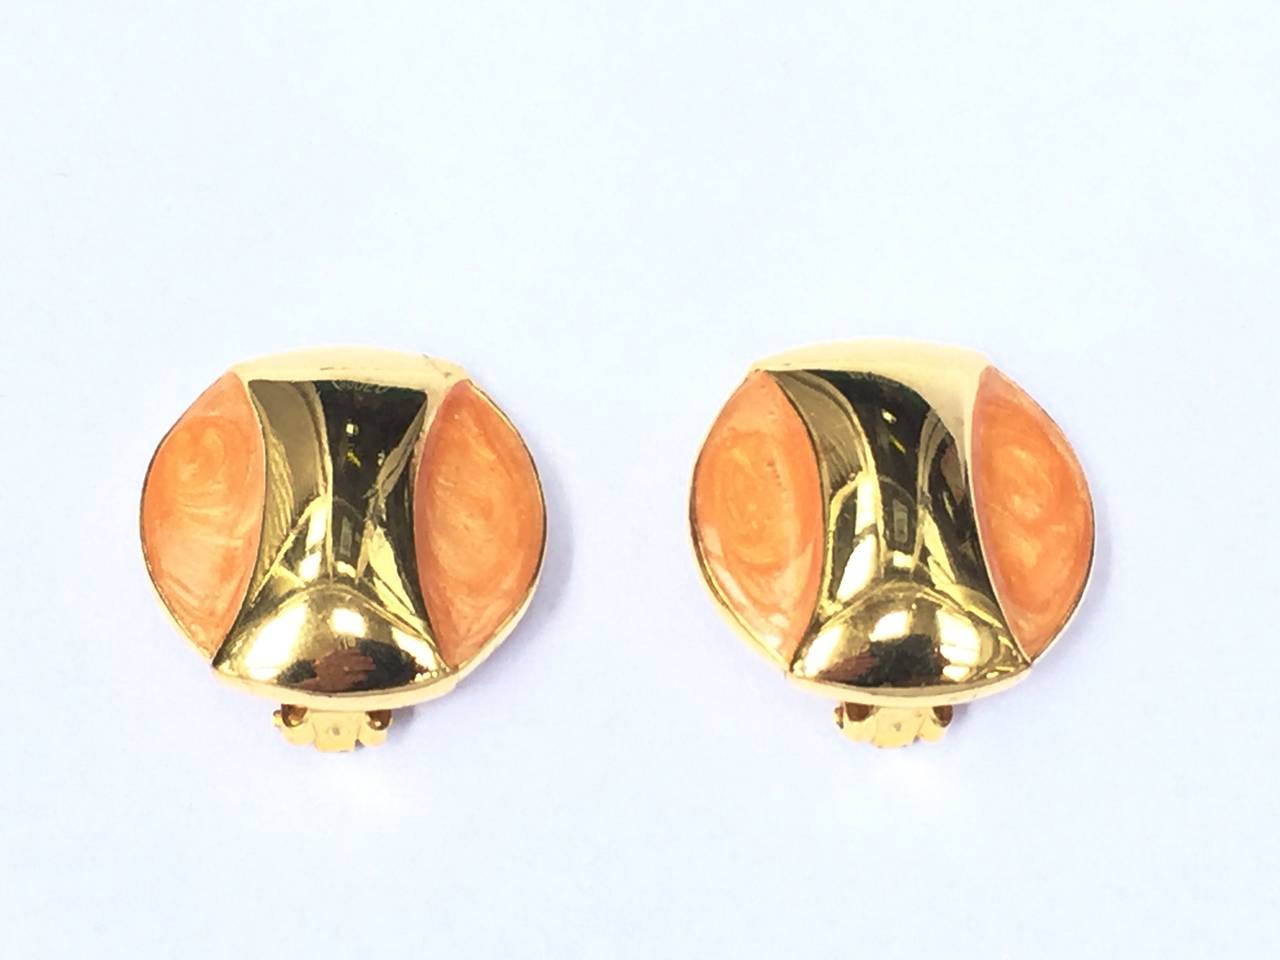 Alexis Kirk 1980s gold with peach swirl enamel clip earrings.
These Alexis Kirk earrings were given to my client by Ed Riley who worked for Alexis Kirk back in the 80s and then Ed Riley went to work for Halston.
Measurement :
1.1/4" diameter.